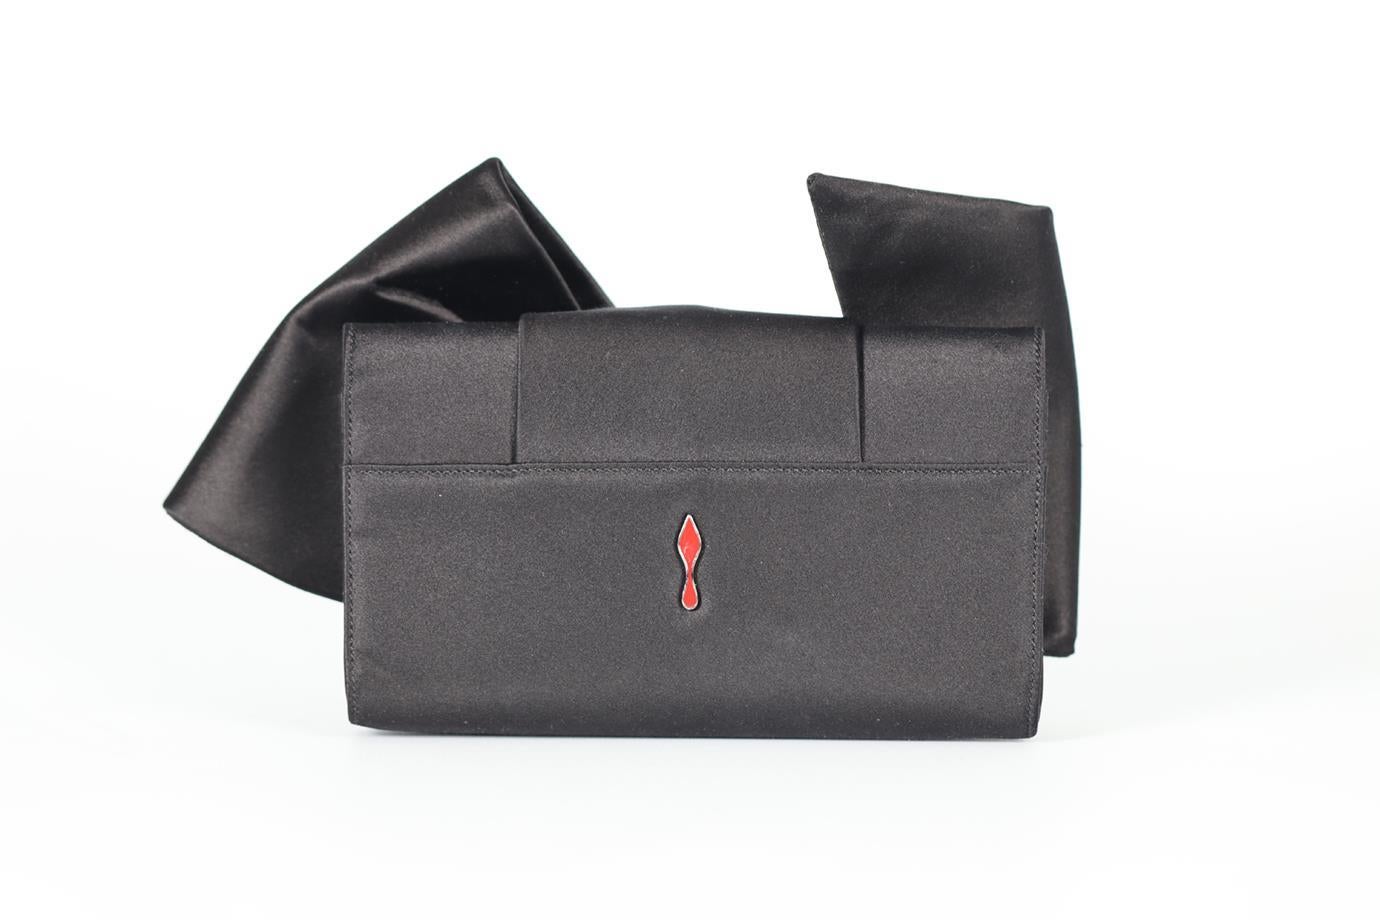 Christian Louboutin Black Bow Detailed Satin Clutch In Good Condition For Sale In London, GB